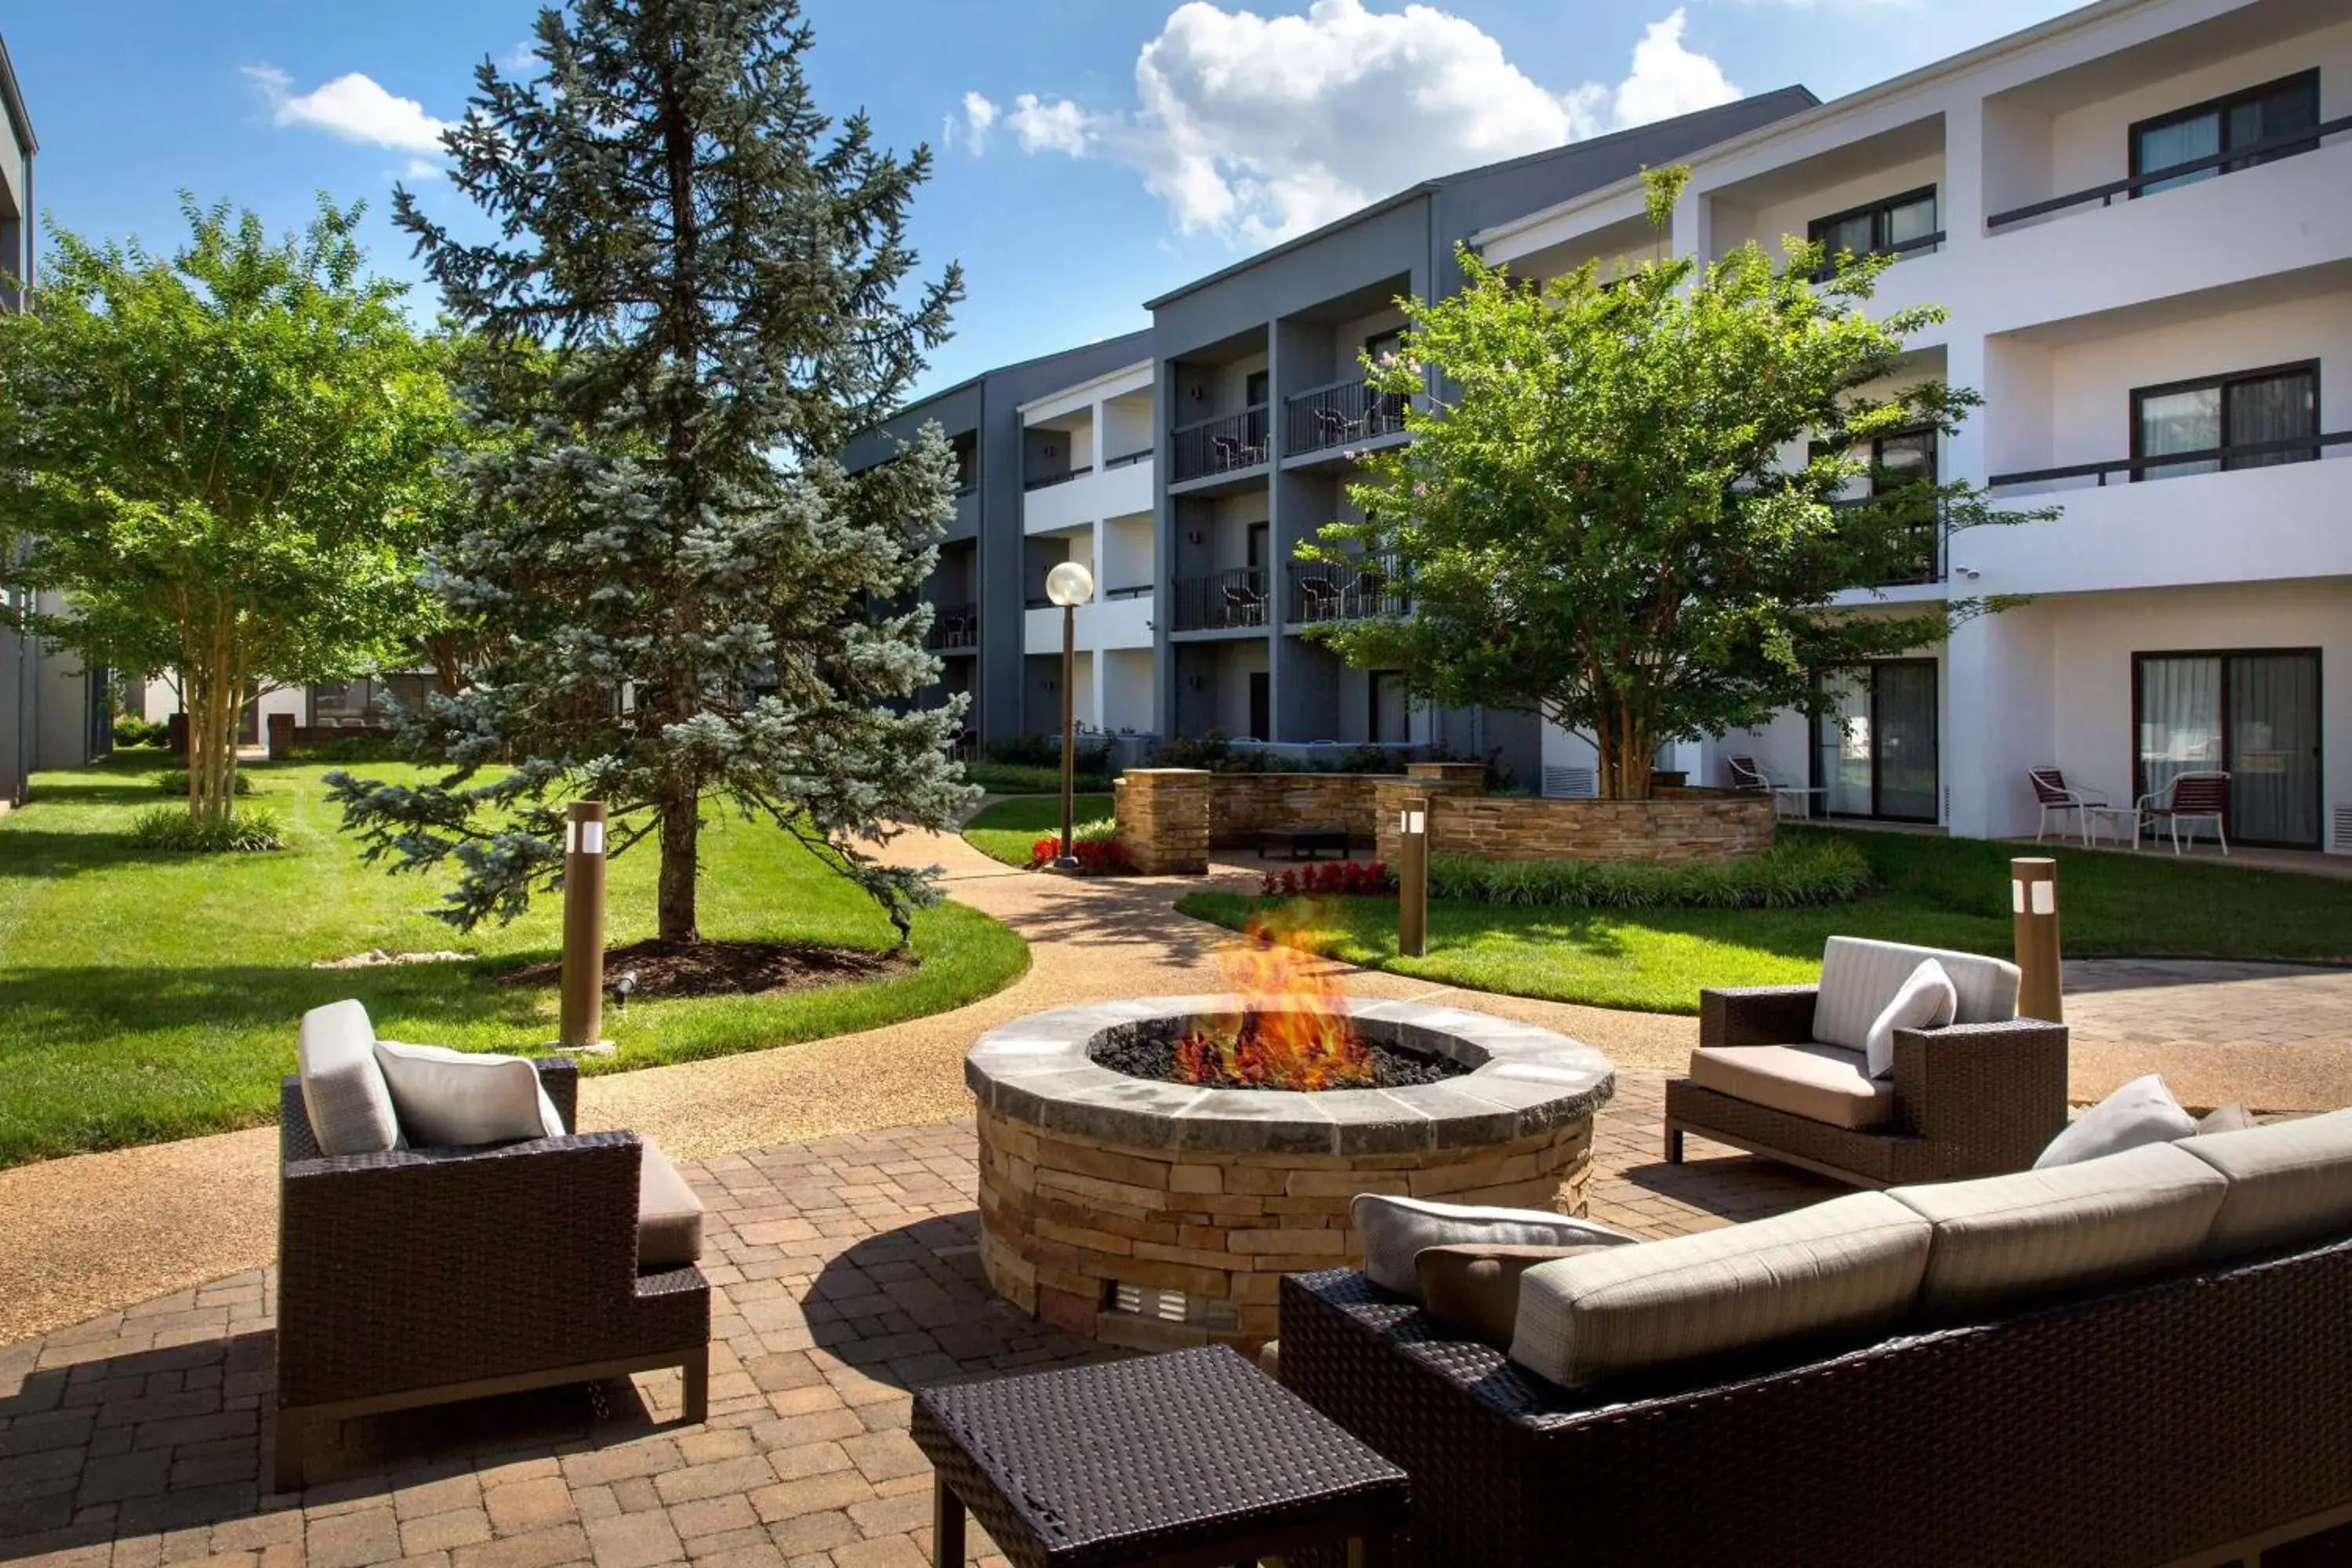 Property Building in Courtyard by Marriott Dulles Airport Herndon/Reston